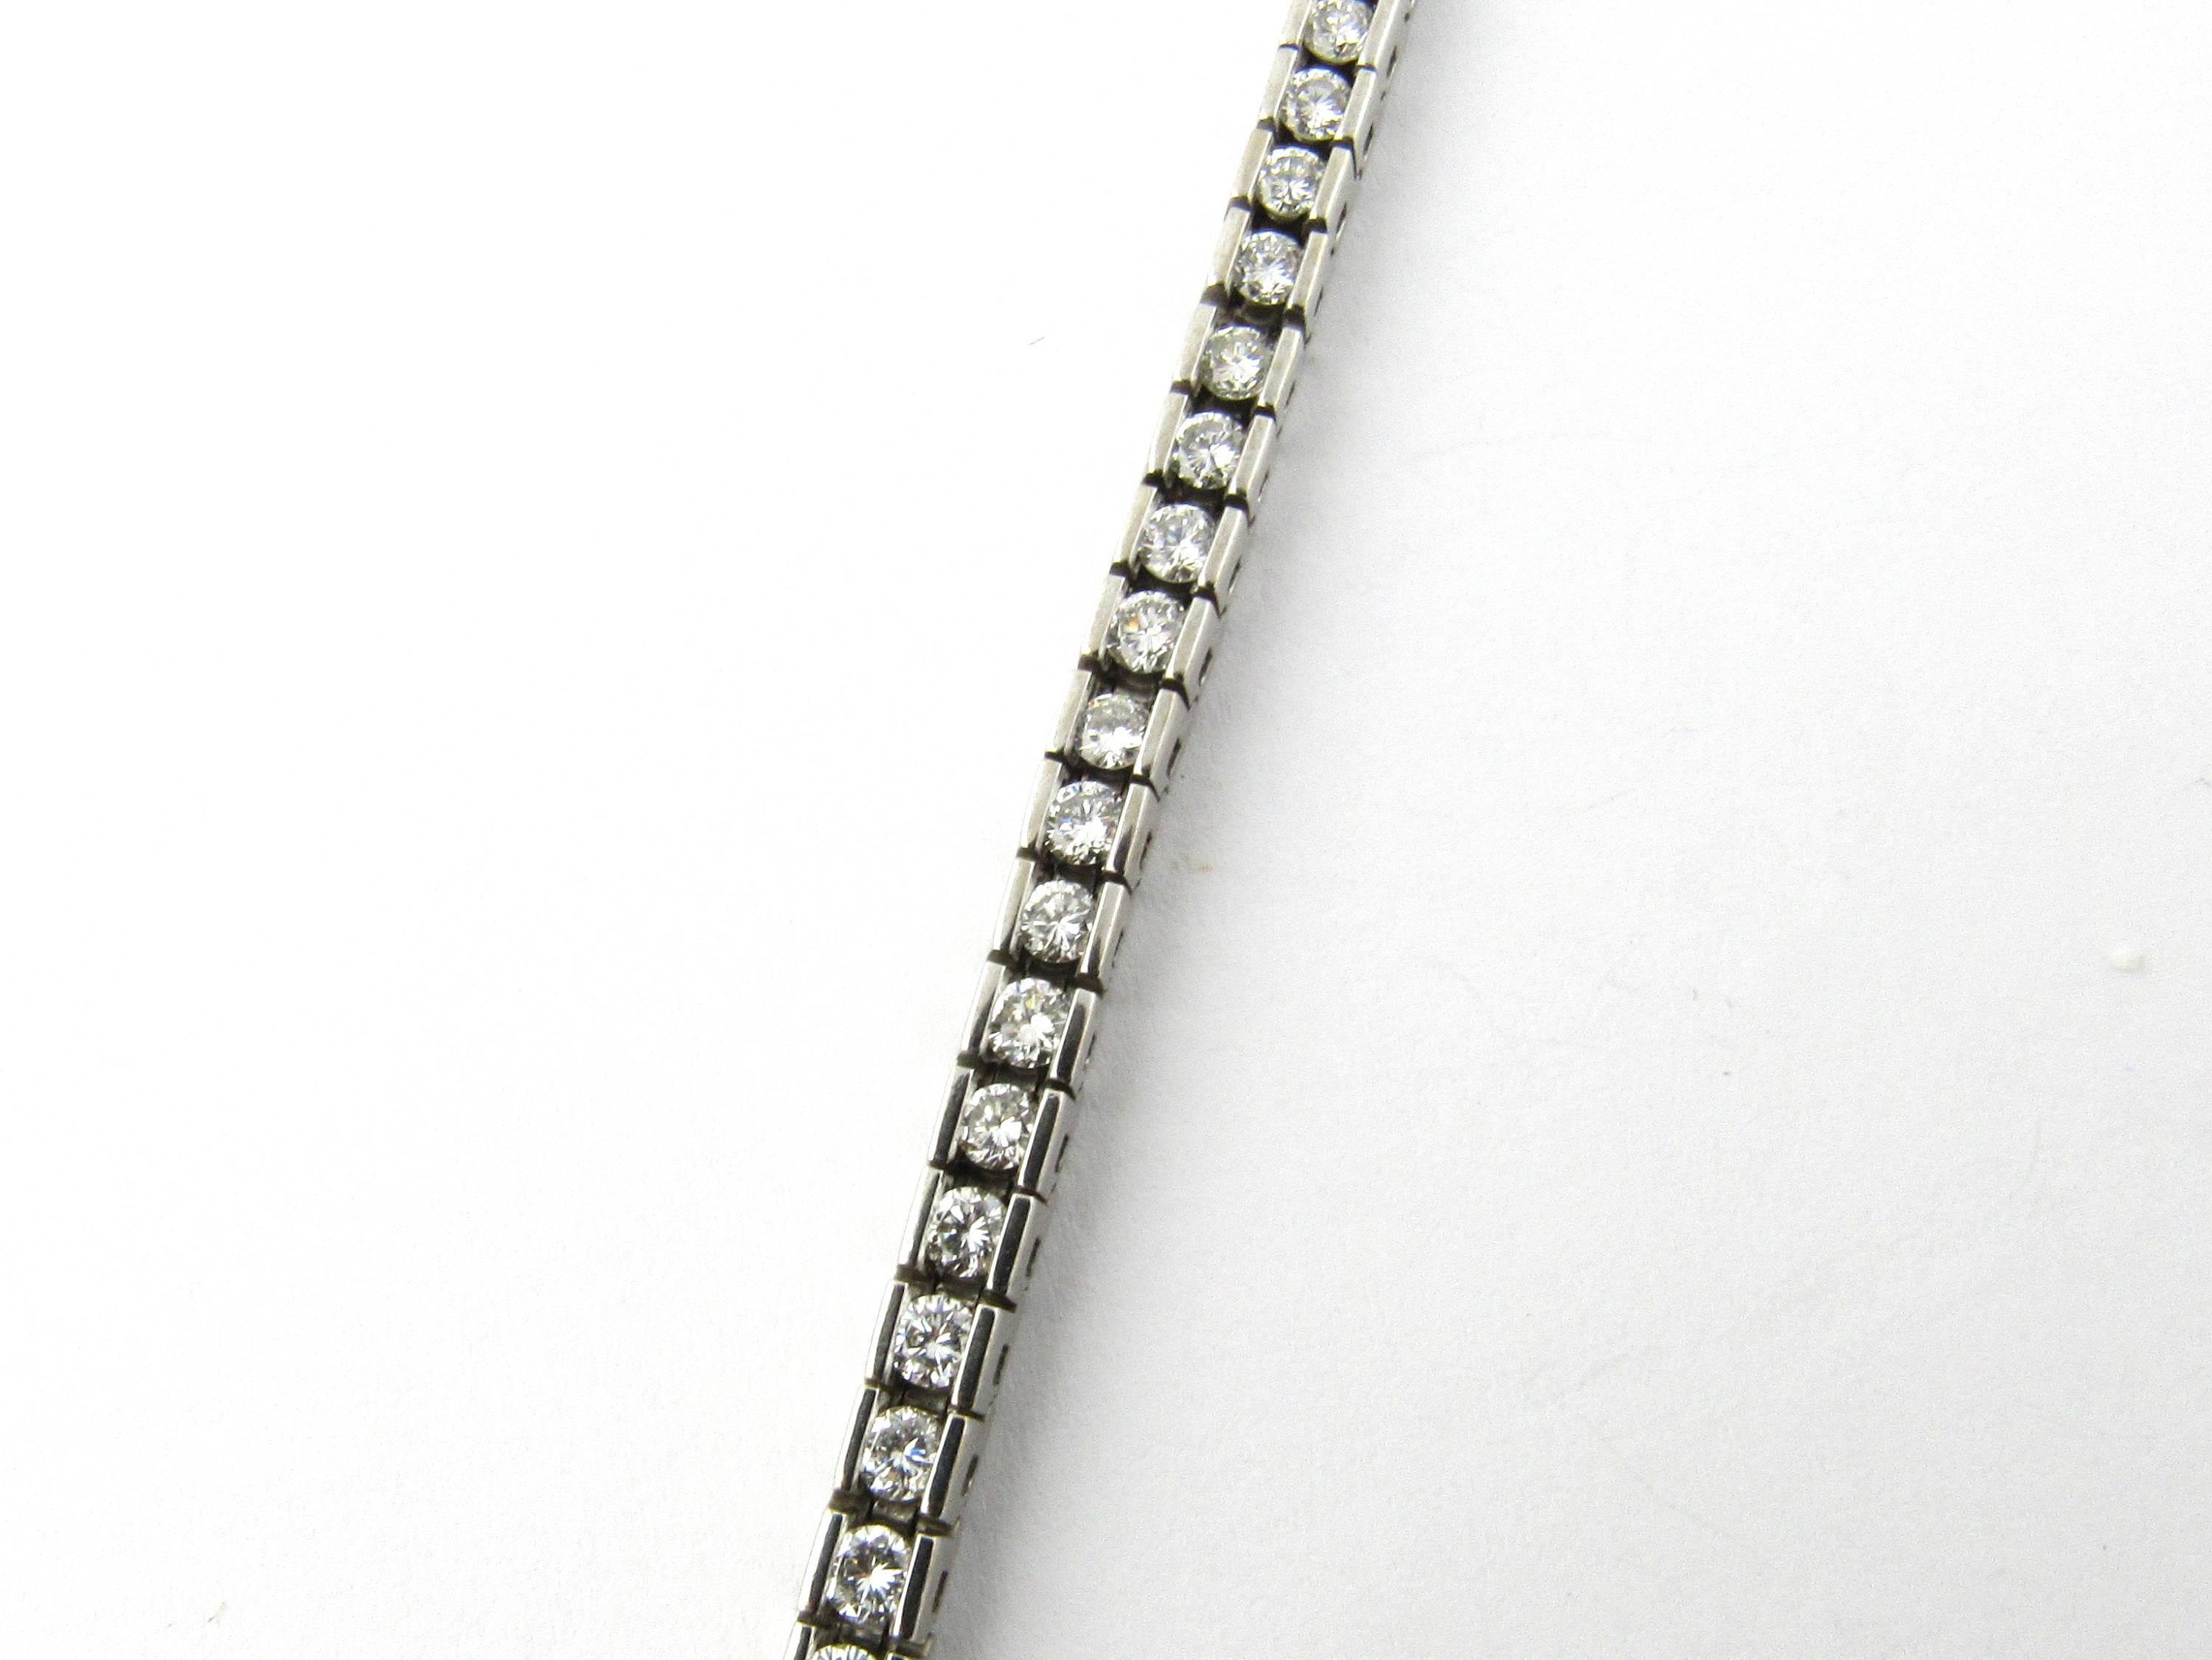 Vintage 14K White Gold Diamond Tennis Bracelet 3.78 cts.

This beautiful diamond tennis bracelet is set with 54 round brilliant diamonds.

Diamonds are approx. 3.78 cts total weight and of VS2 clarity and H color

This bracelet is very flexible with